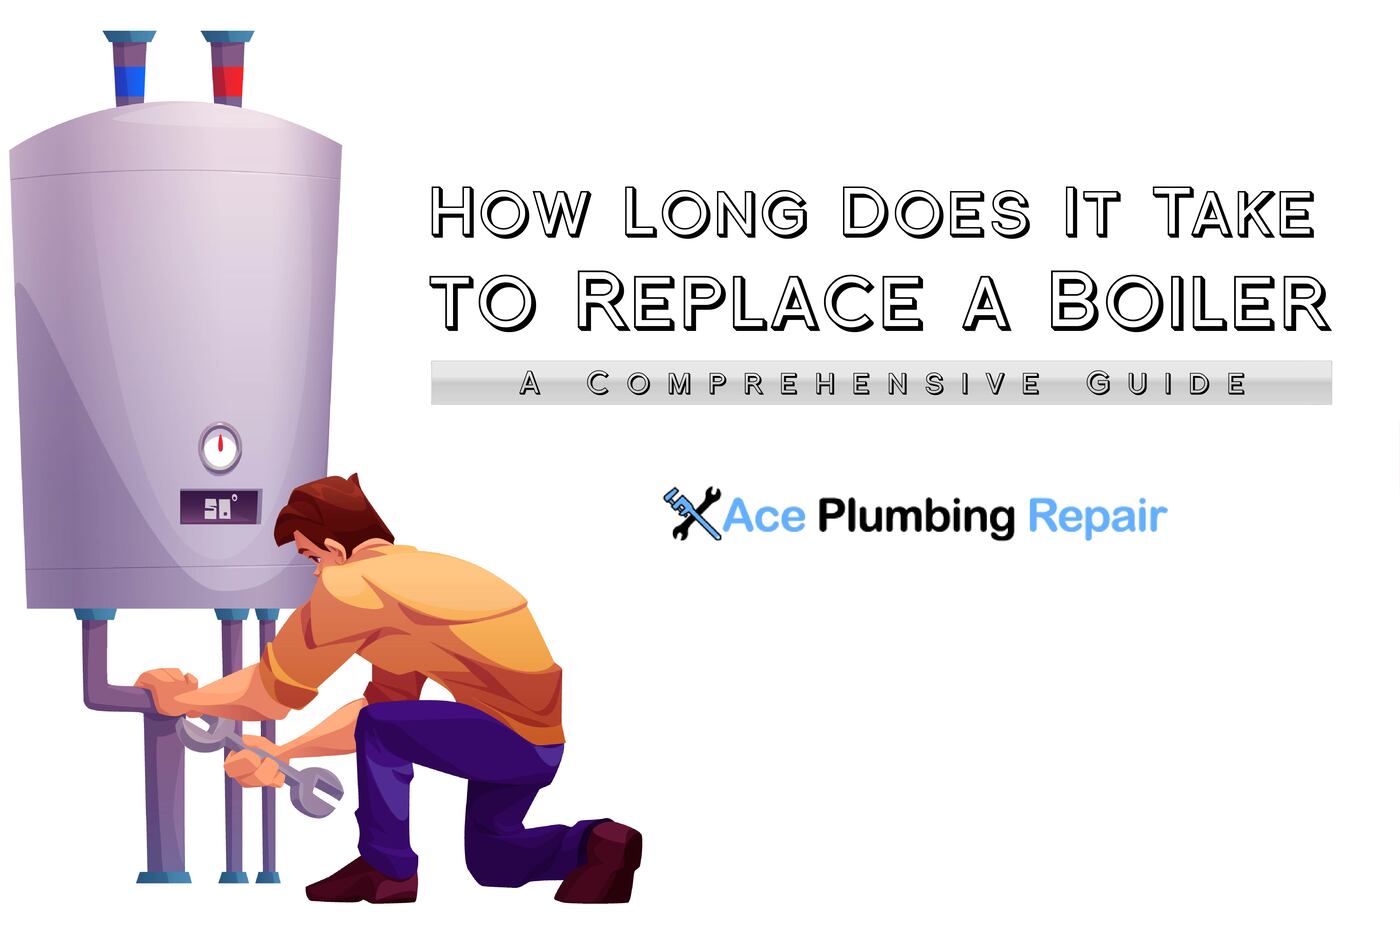 how long does it take to replace a boiler?